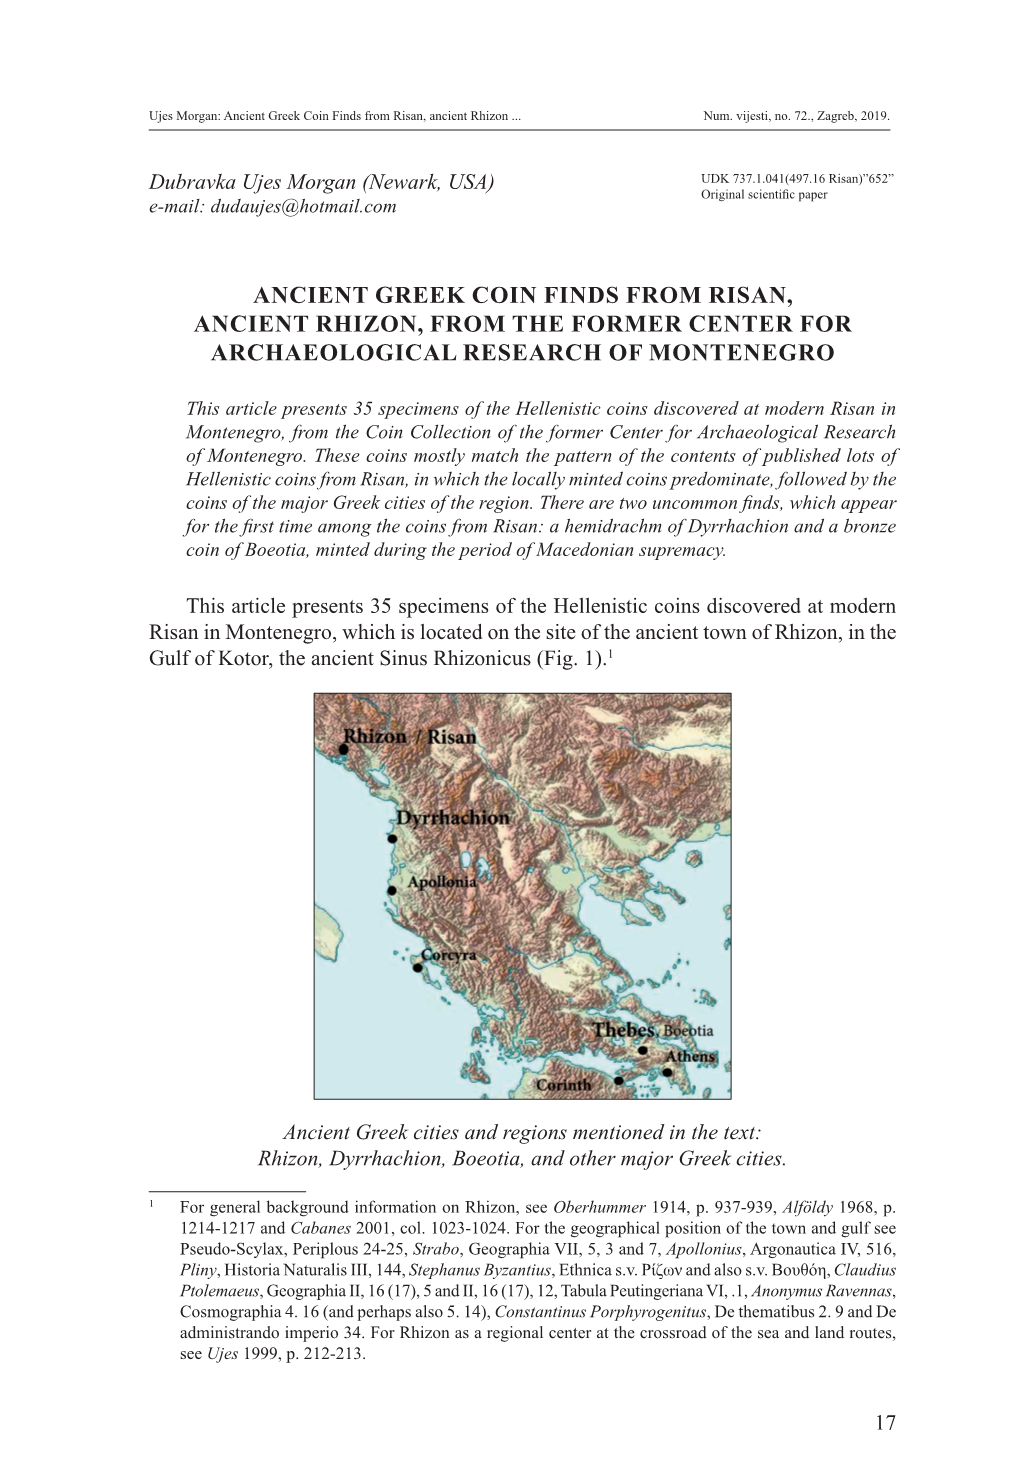 Ancient Greek Coin Finds from Risan, Ancient Rhizon, from the Former Center for Archaeological Research of Montenegro